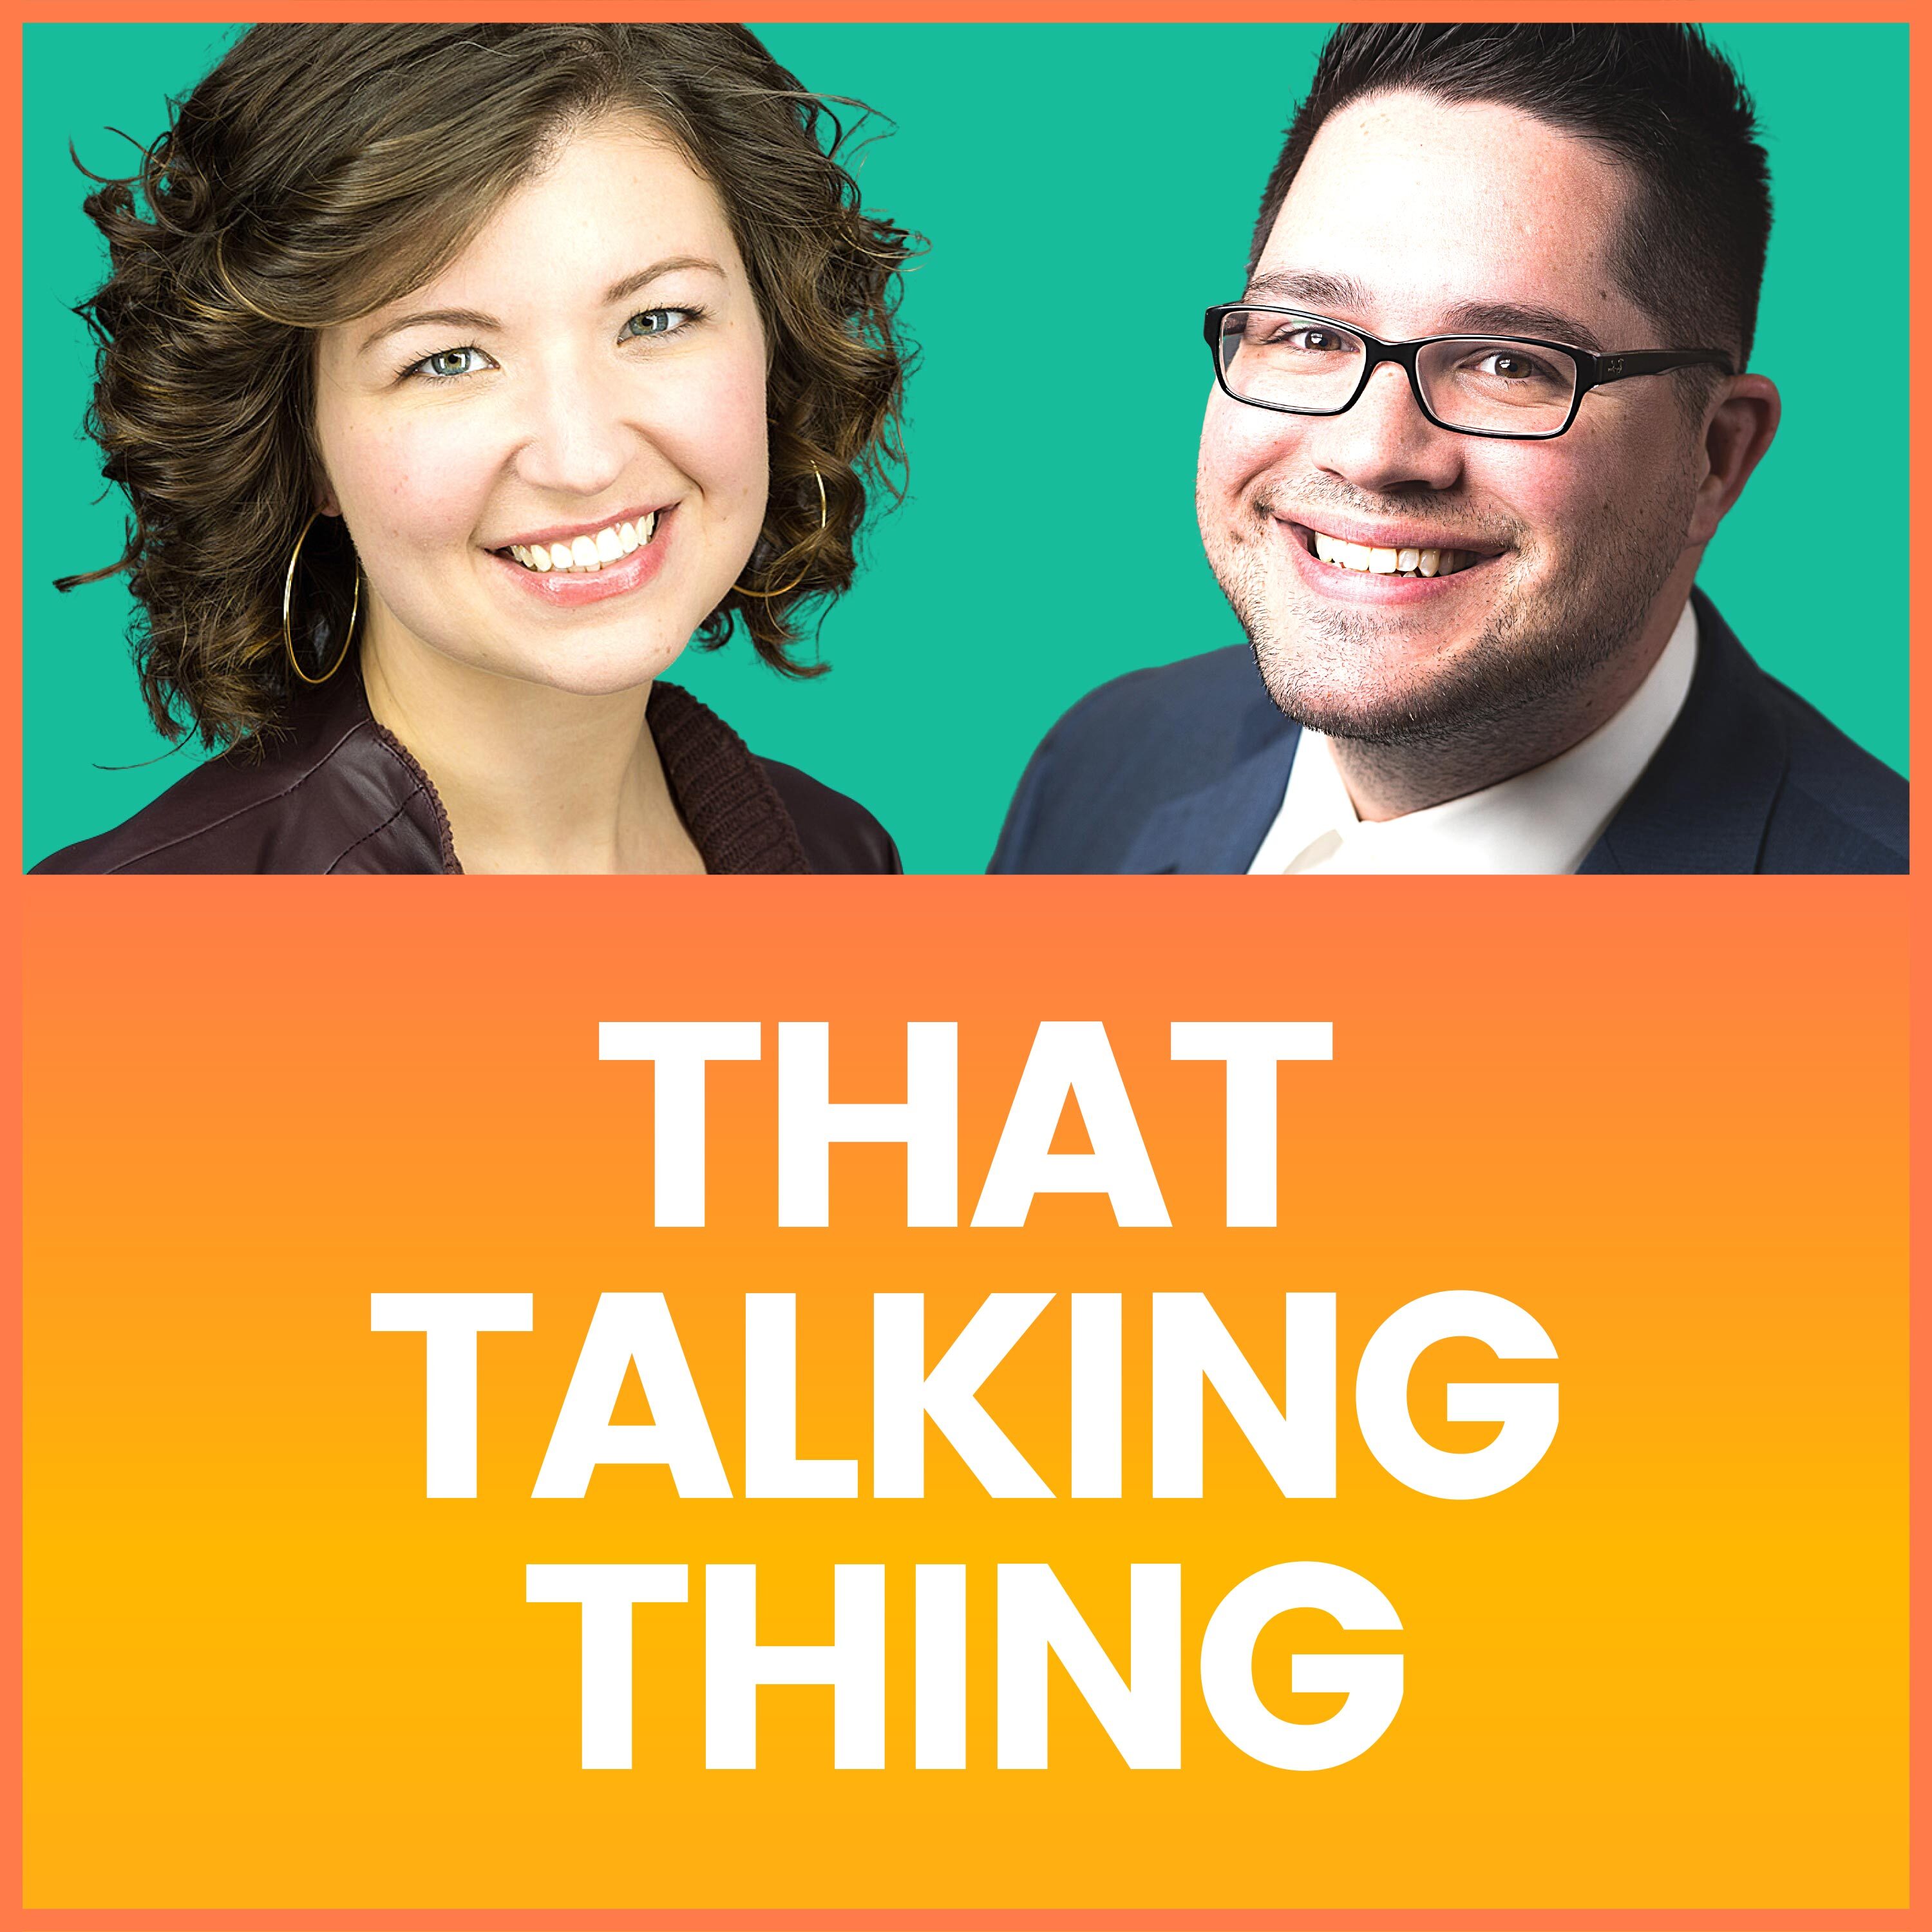 Afraid to Suck, Follow Process as Leaders, 10yr BHAG | That Talking Thing | S2 EP3